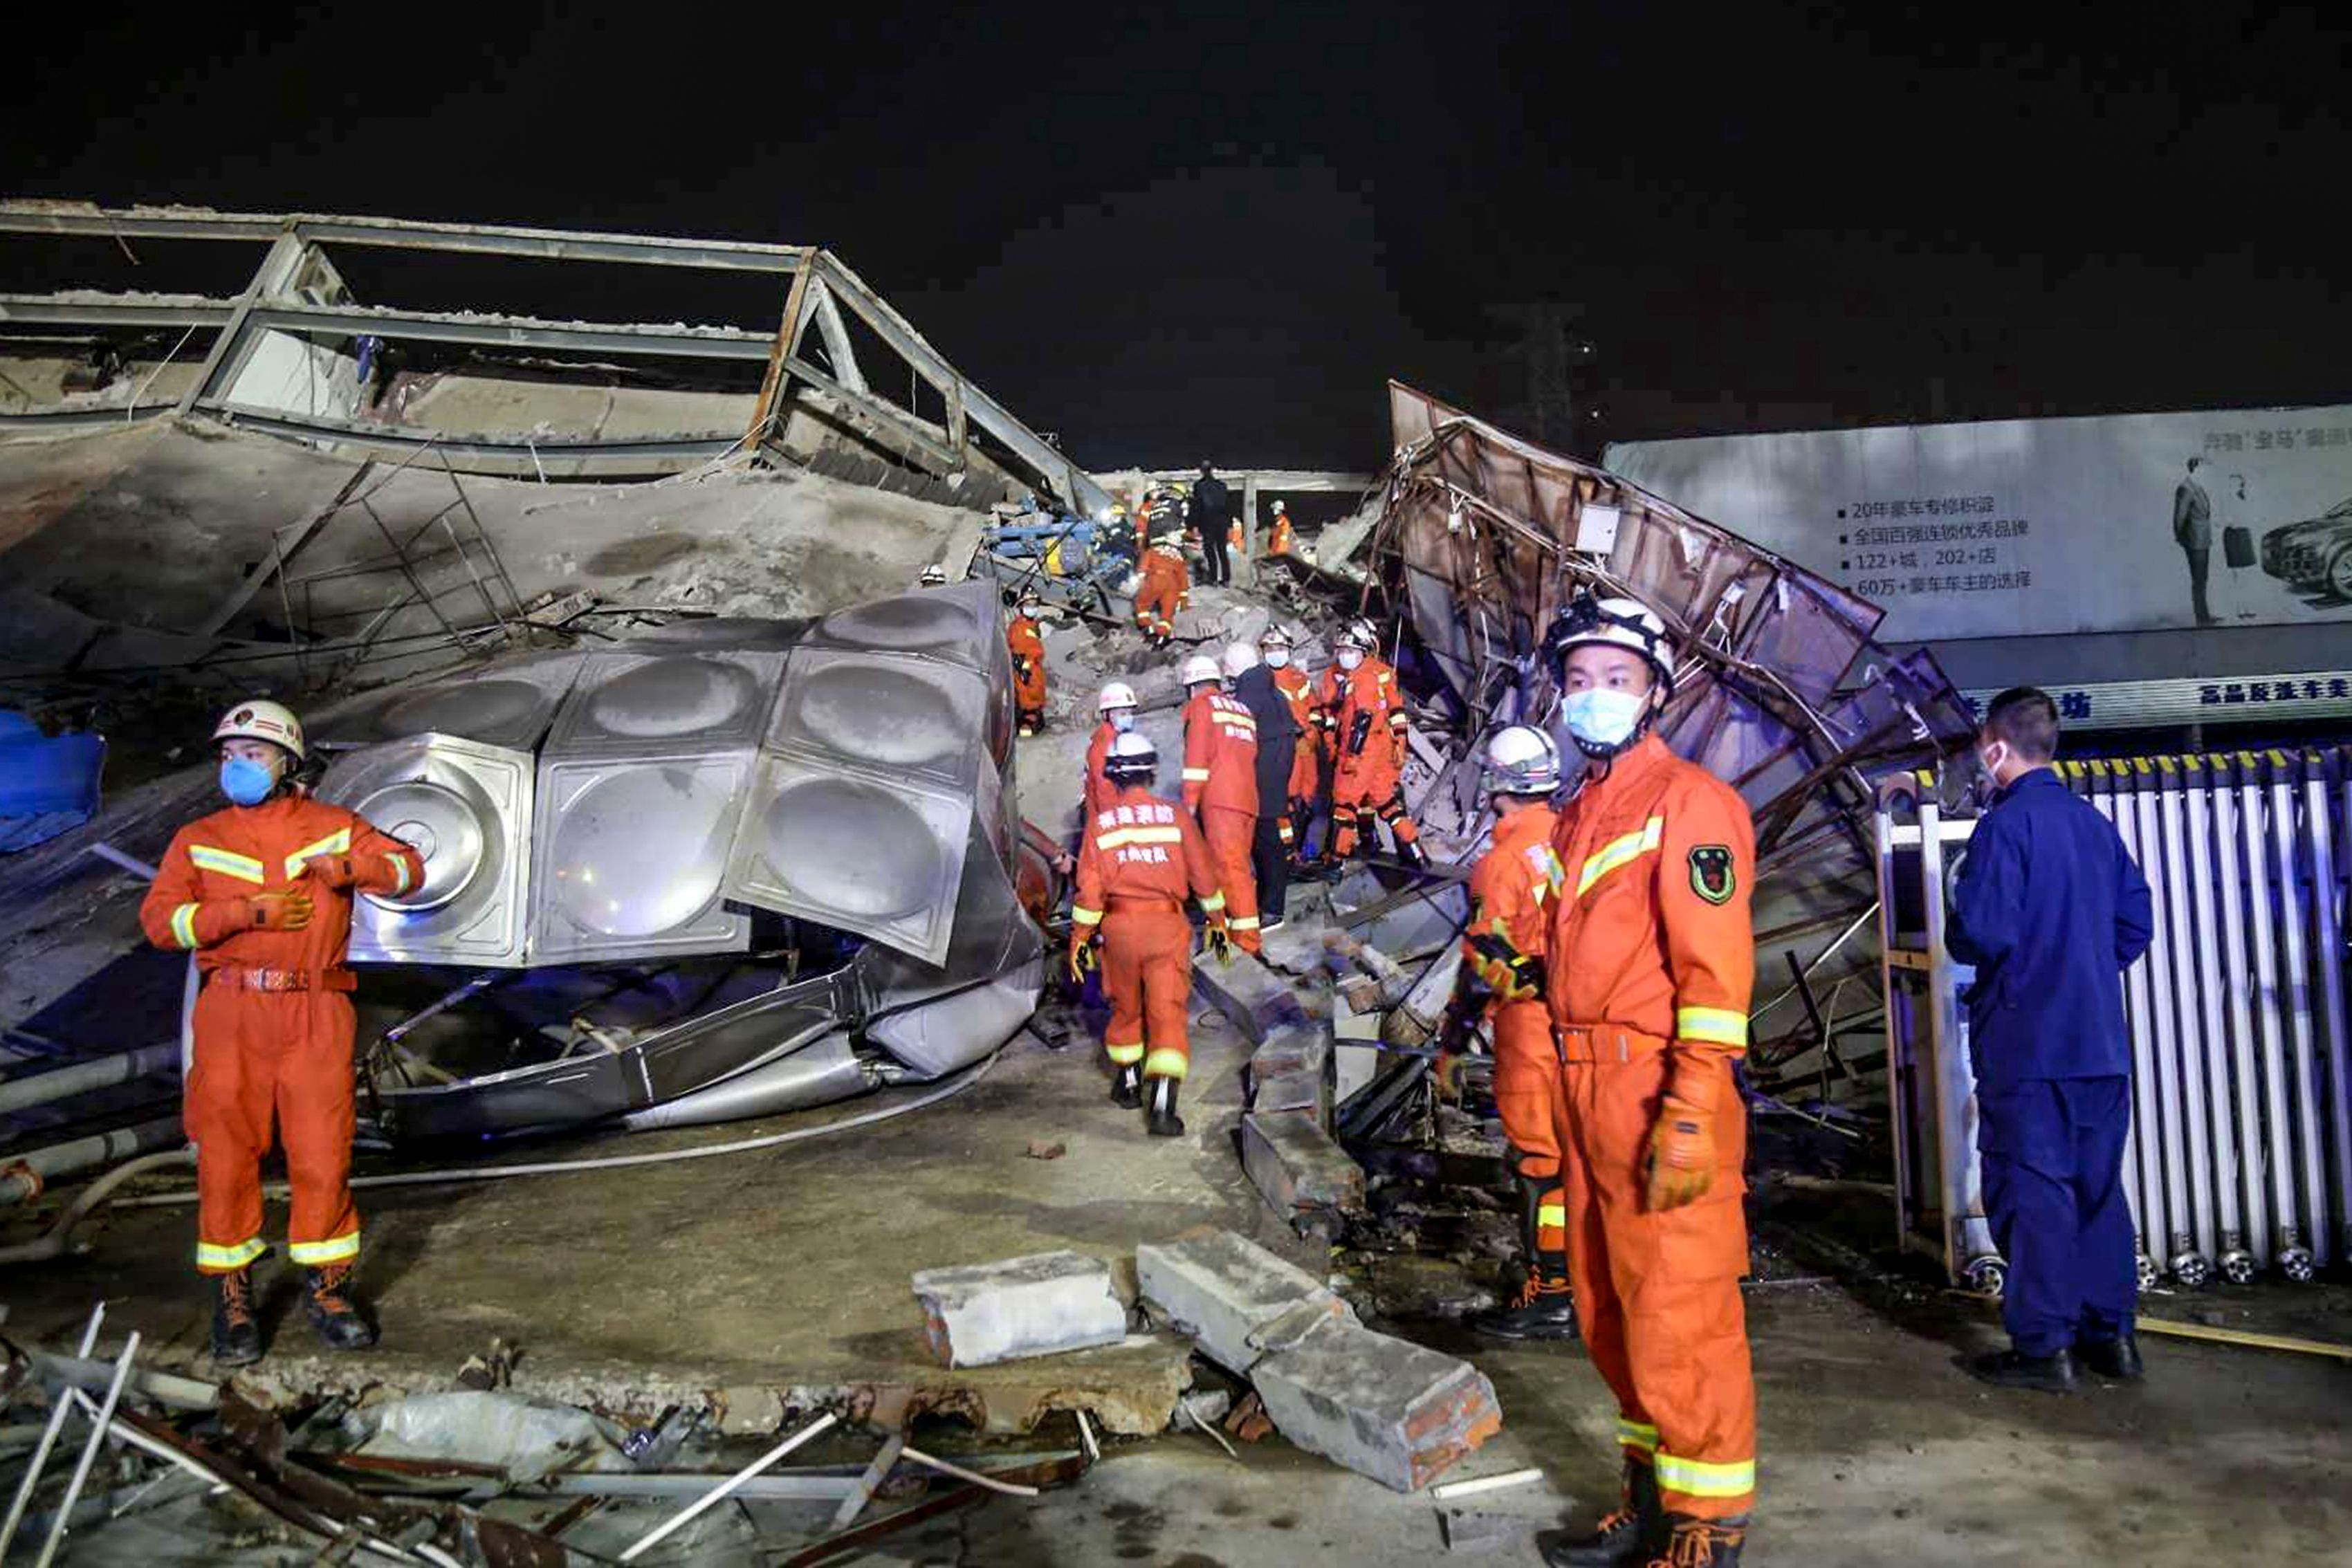 In this image, emergency workers stand in the rubble